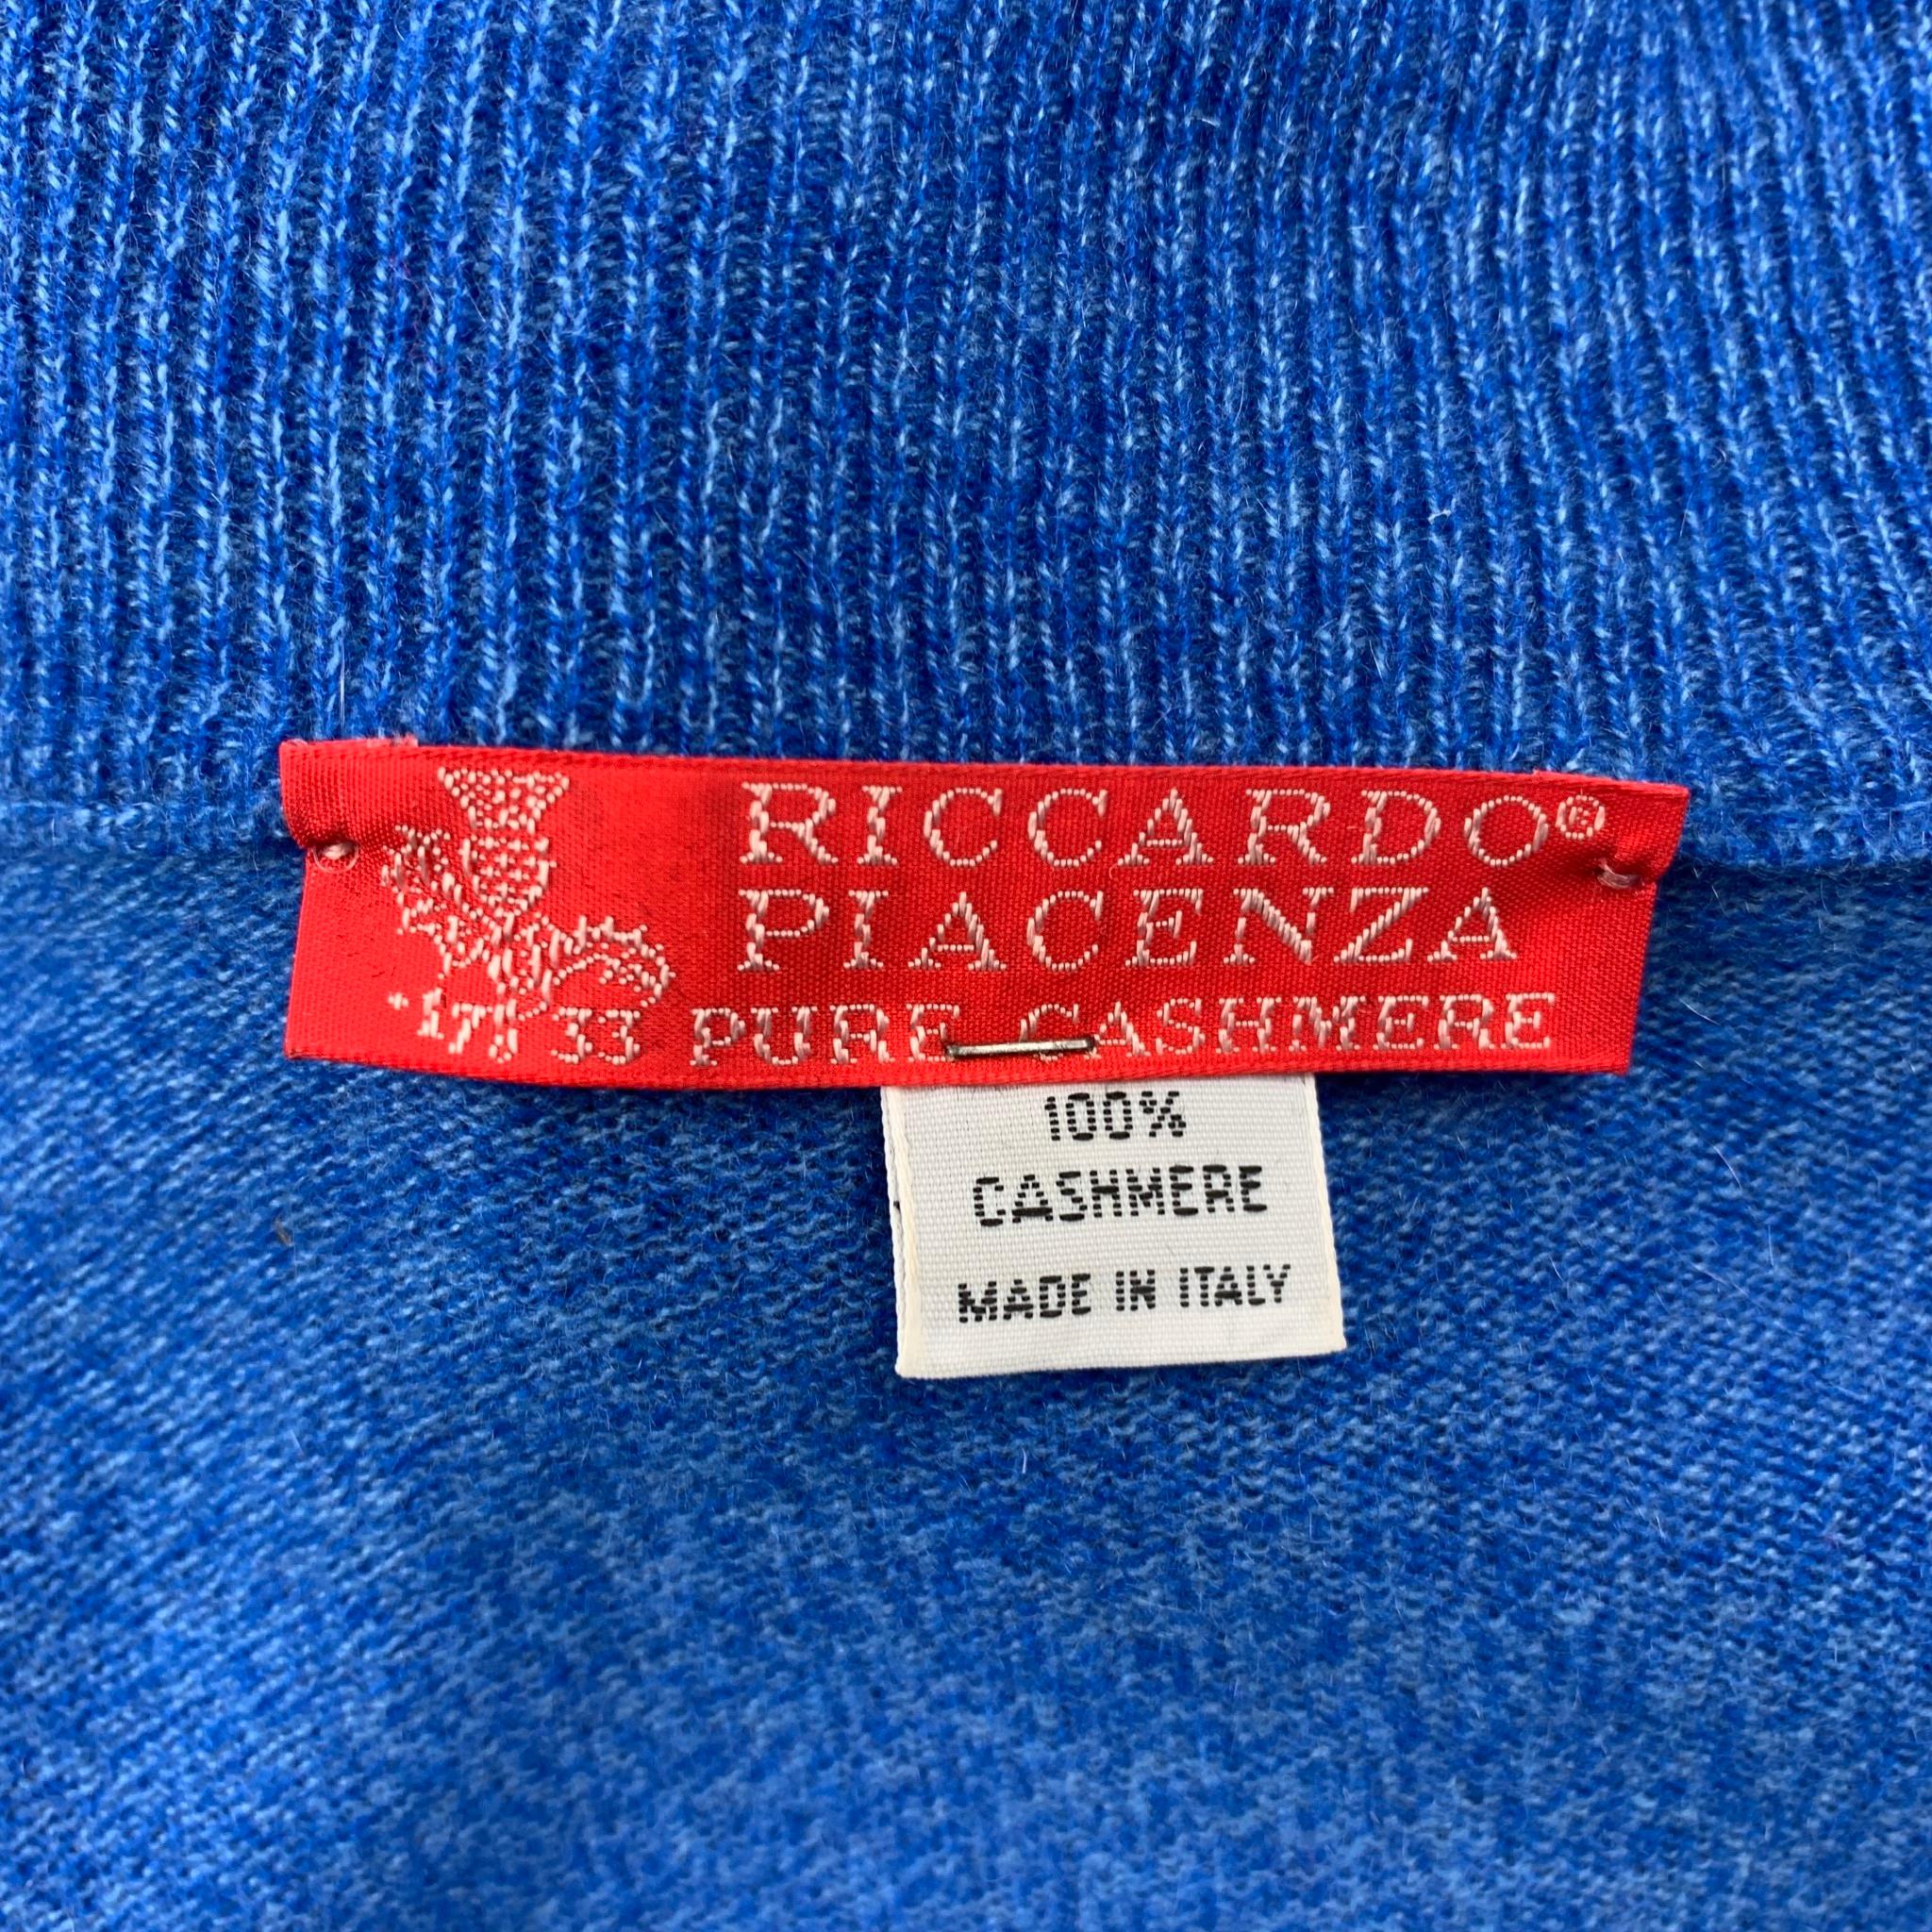 Men's RICCARDO PIACENZA Size M Blue Heather Cashmere Zip Up Pullover Sweater